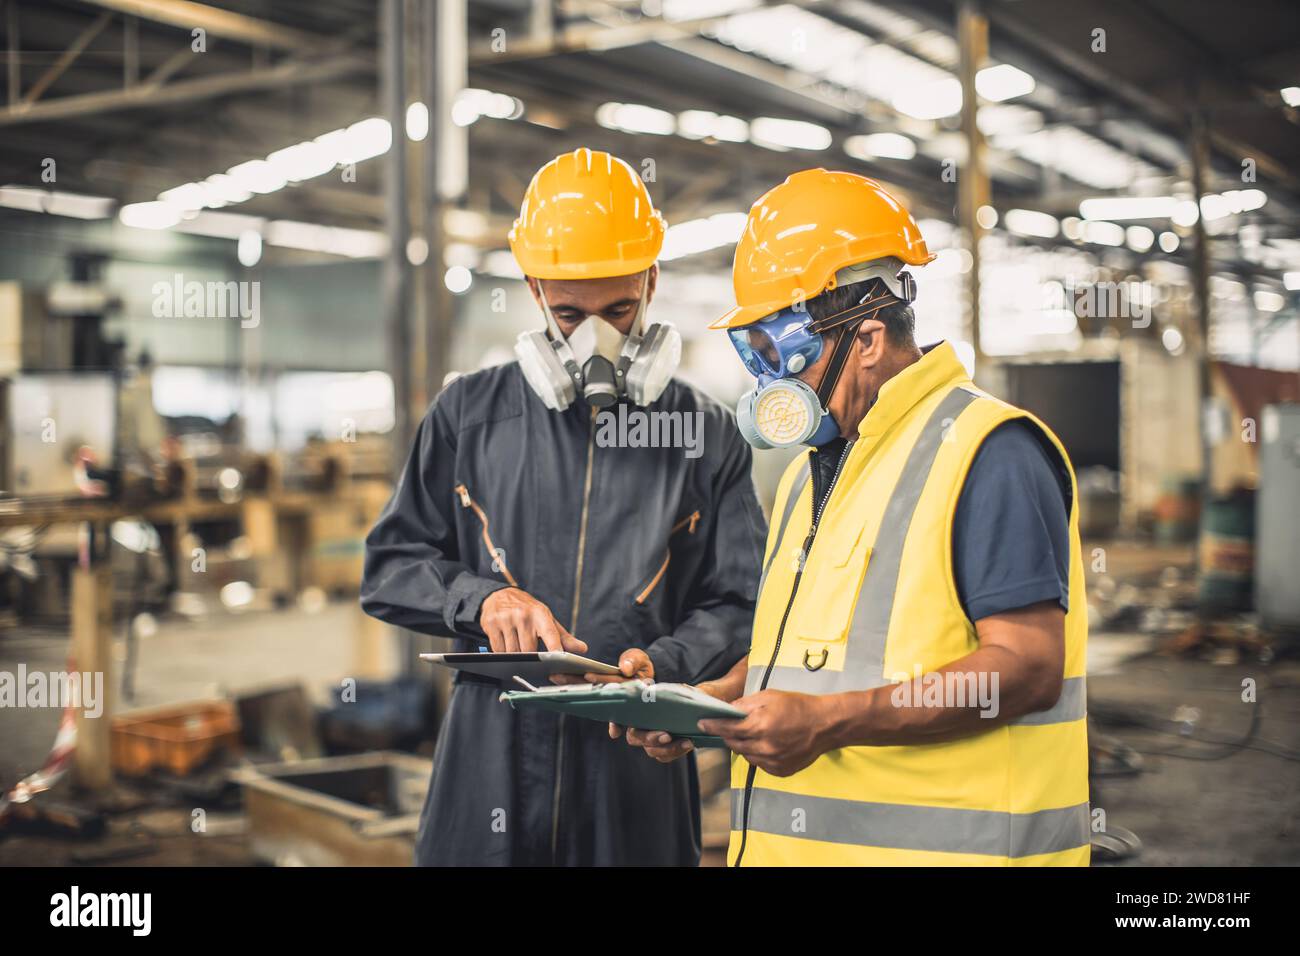 Toxic chemical gas leak safety team working cleaning in danger factory workshop environment contamination safety and protection Stock Photo